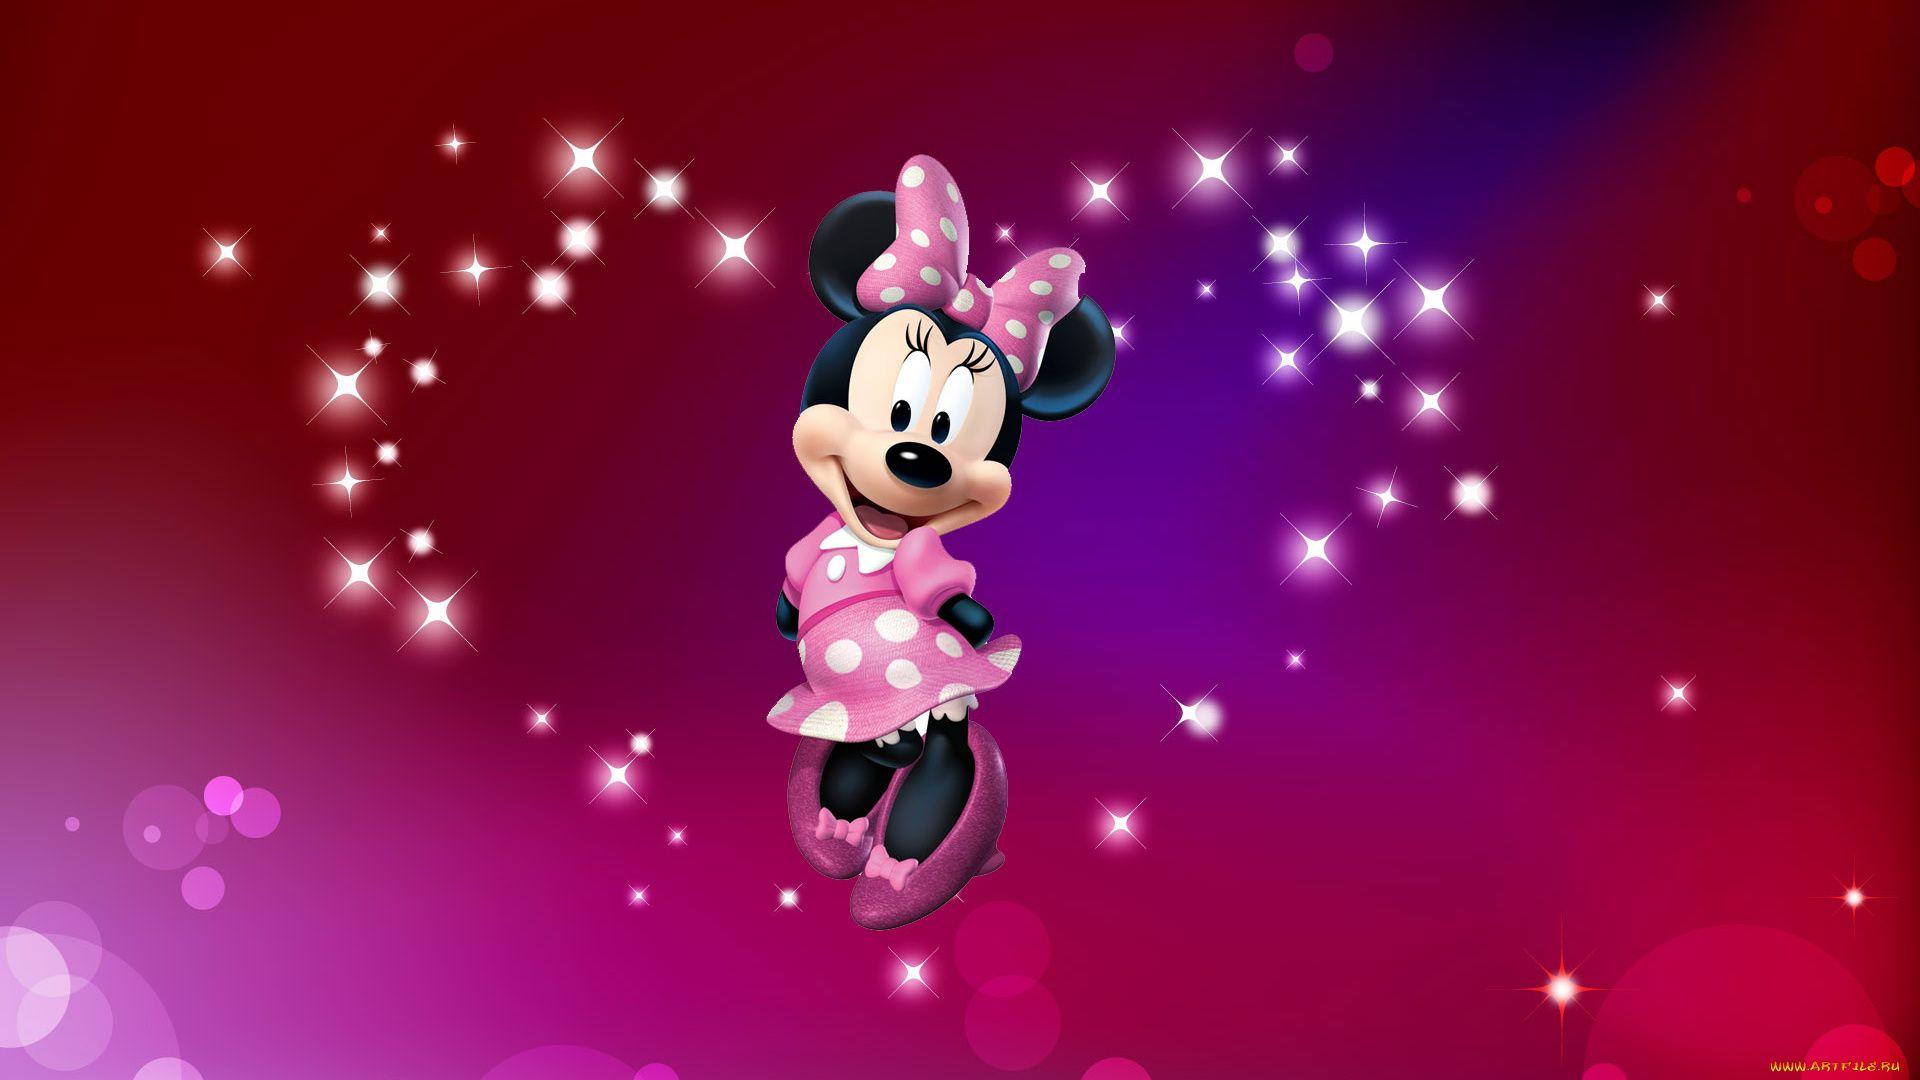 Red Minnie Mouse Wallpapers - Top Free Red Minnie Mouse Backgrounds